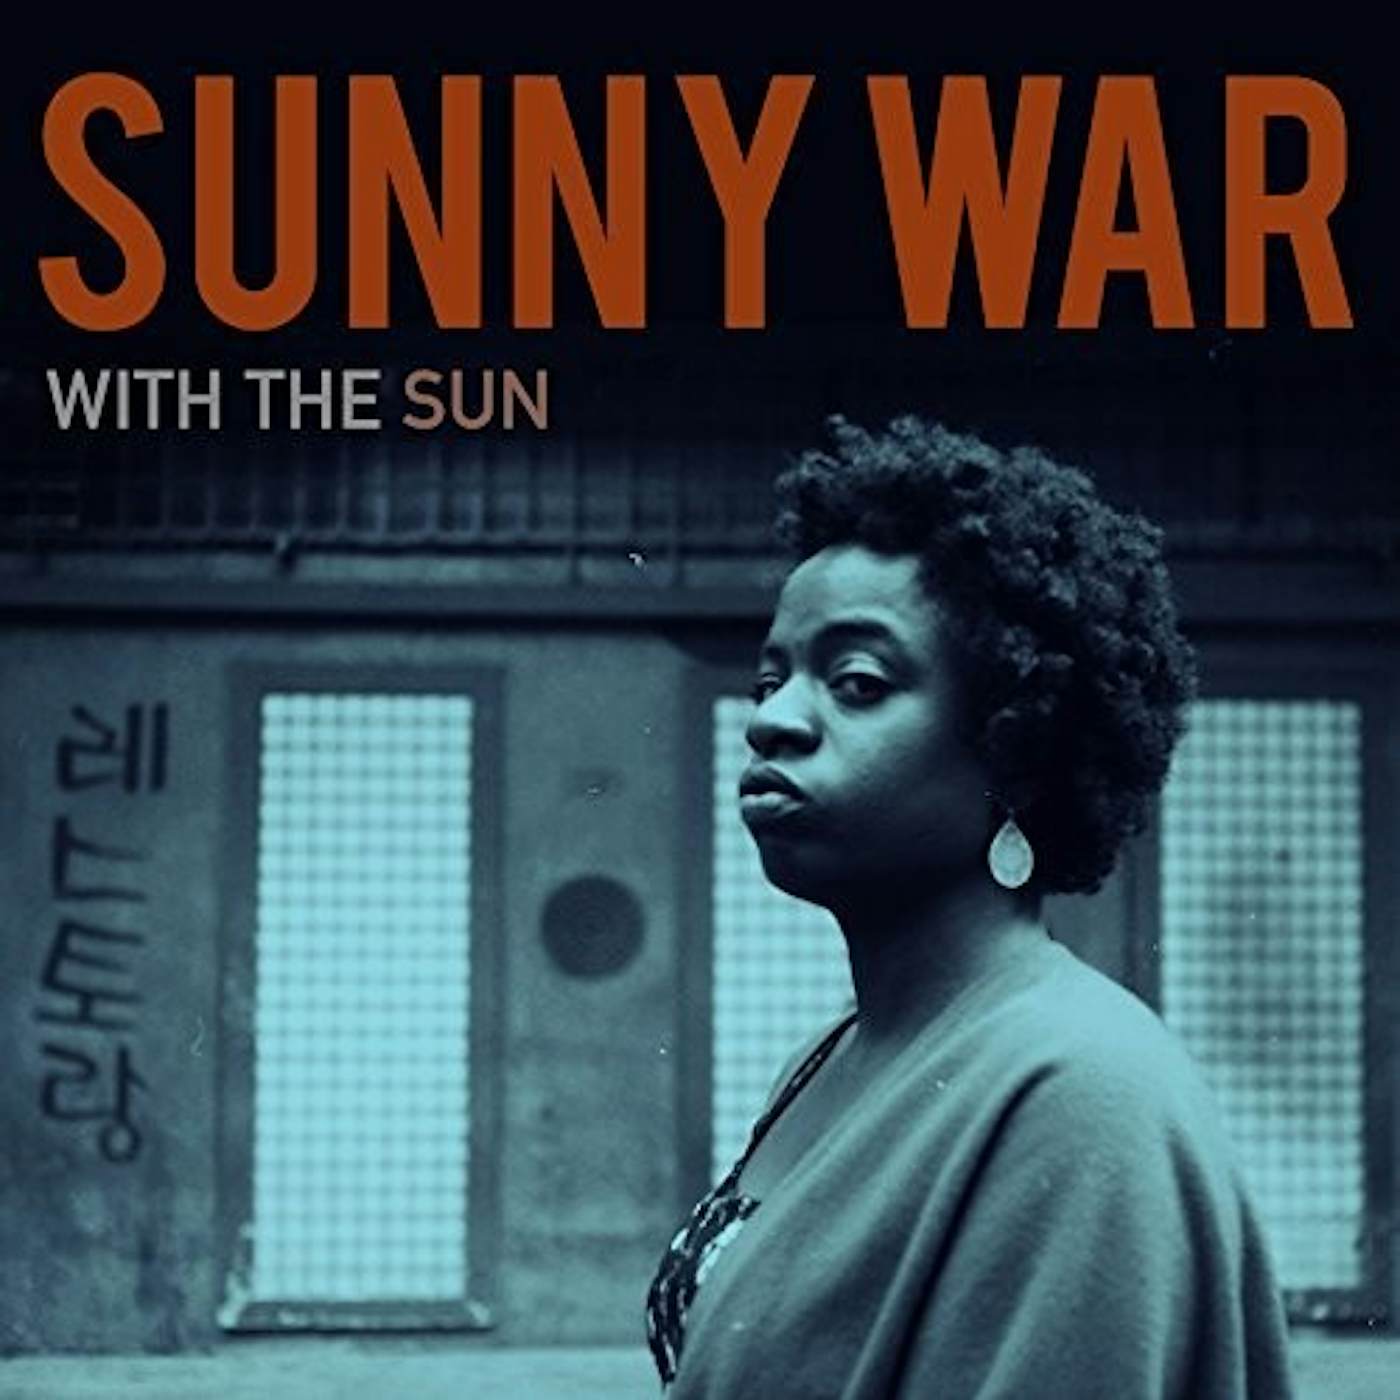 Sunny War WITH THE SUN (BROWN) Vinyl Record